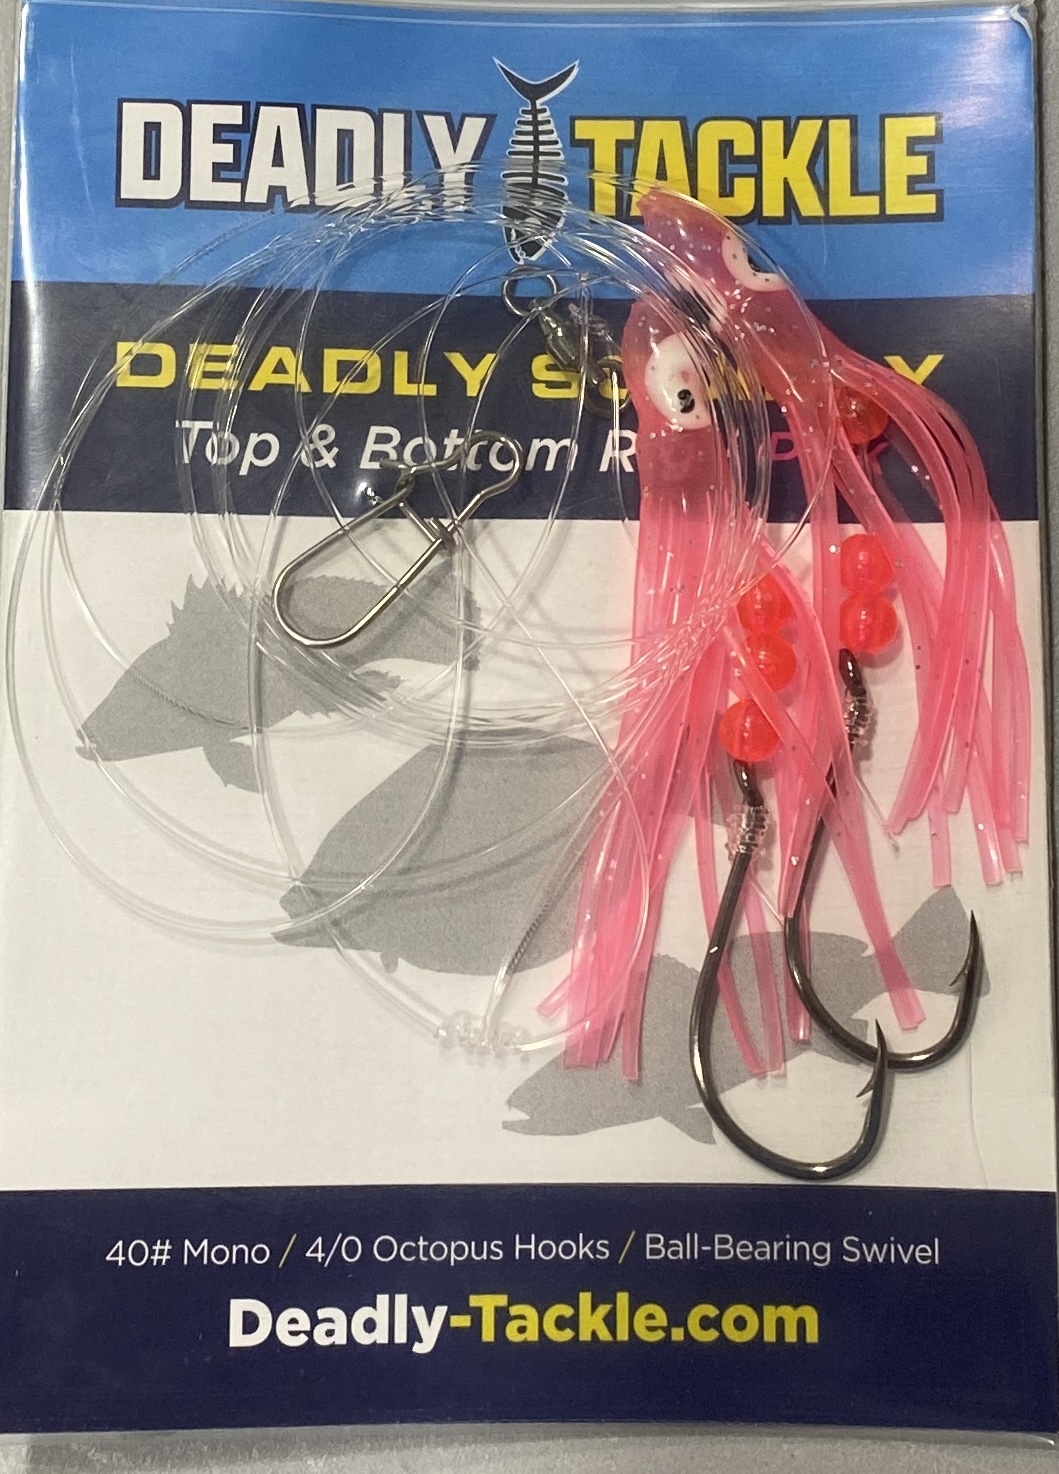 Deadly Tackle Chartreuse Squidly - Fishing Reports & News Ocean City MD  Tournaments